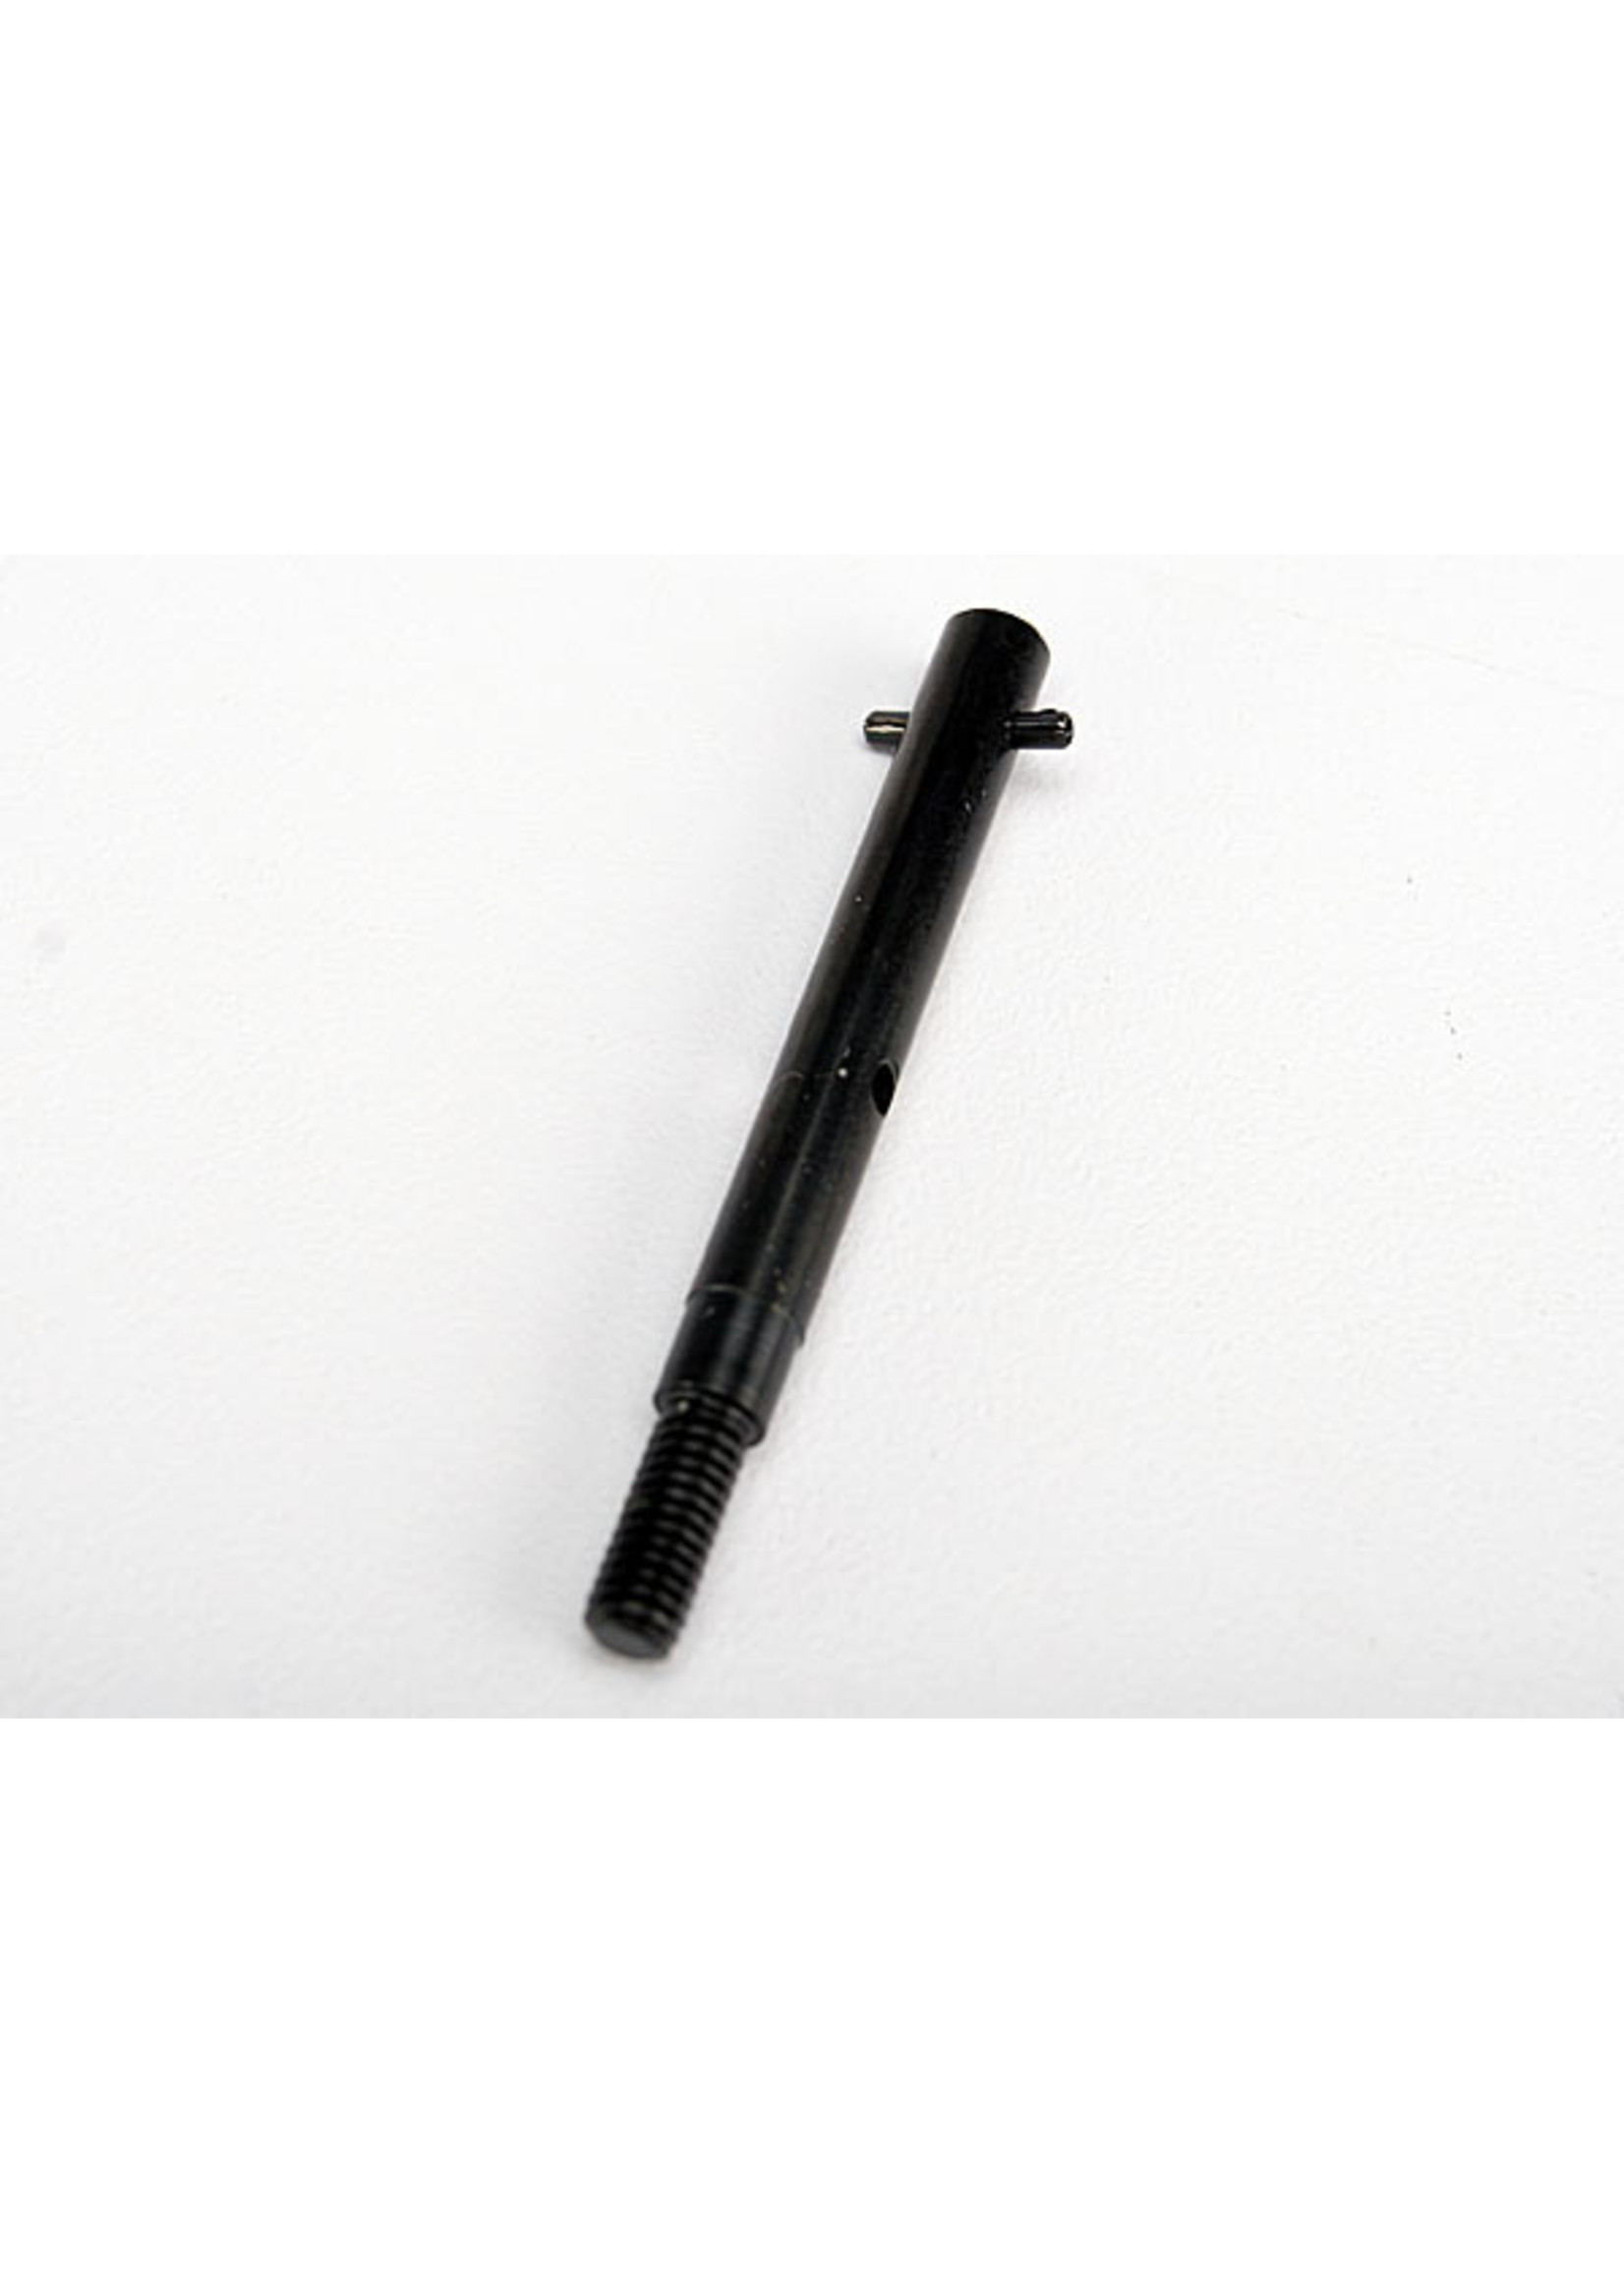 Traxxas 3793 - Slipper Shaft with Spring Pin